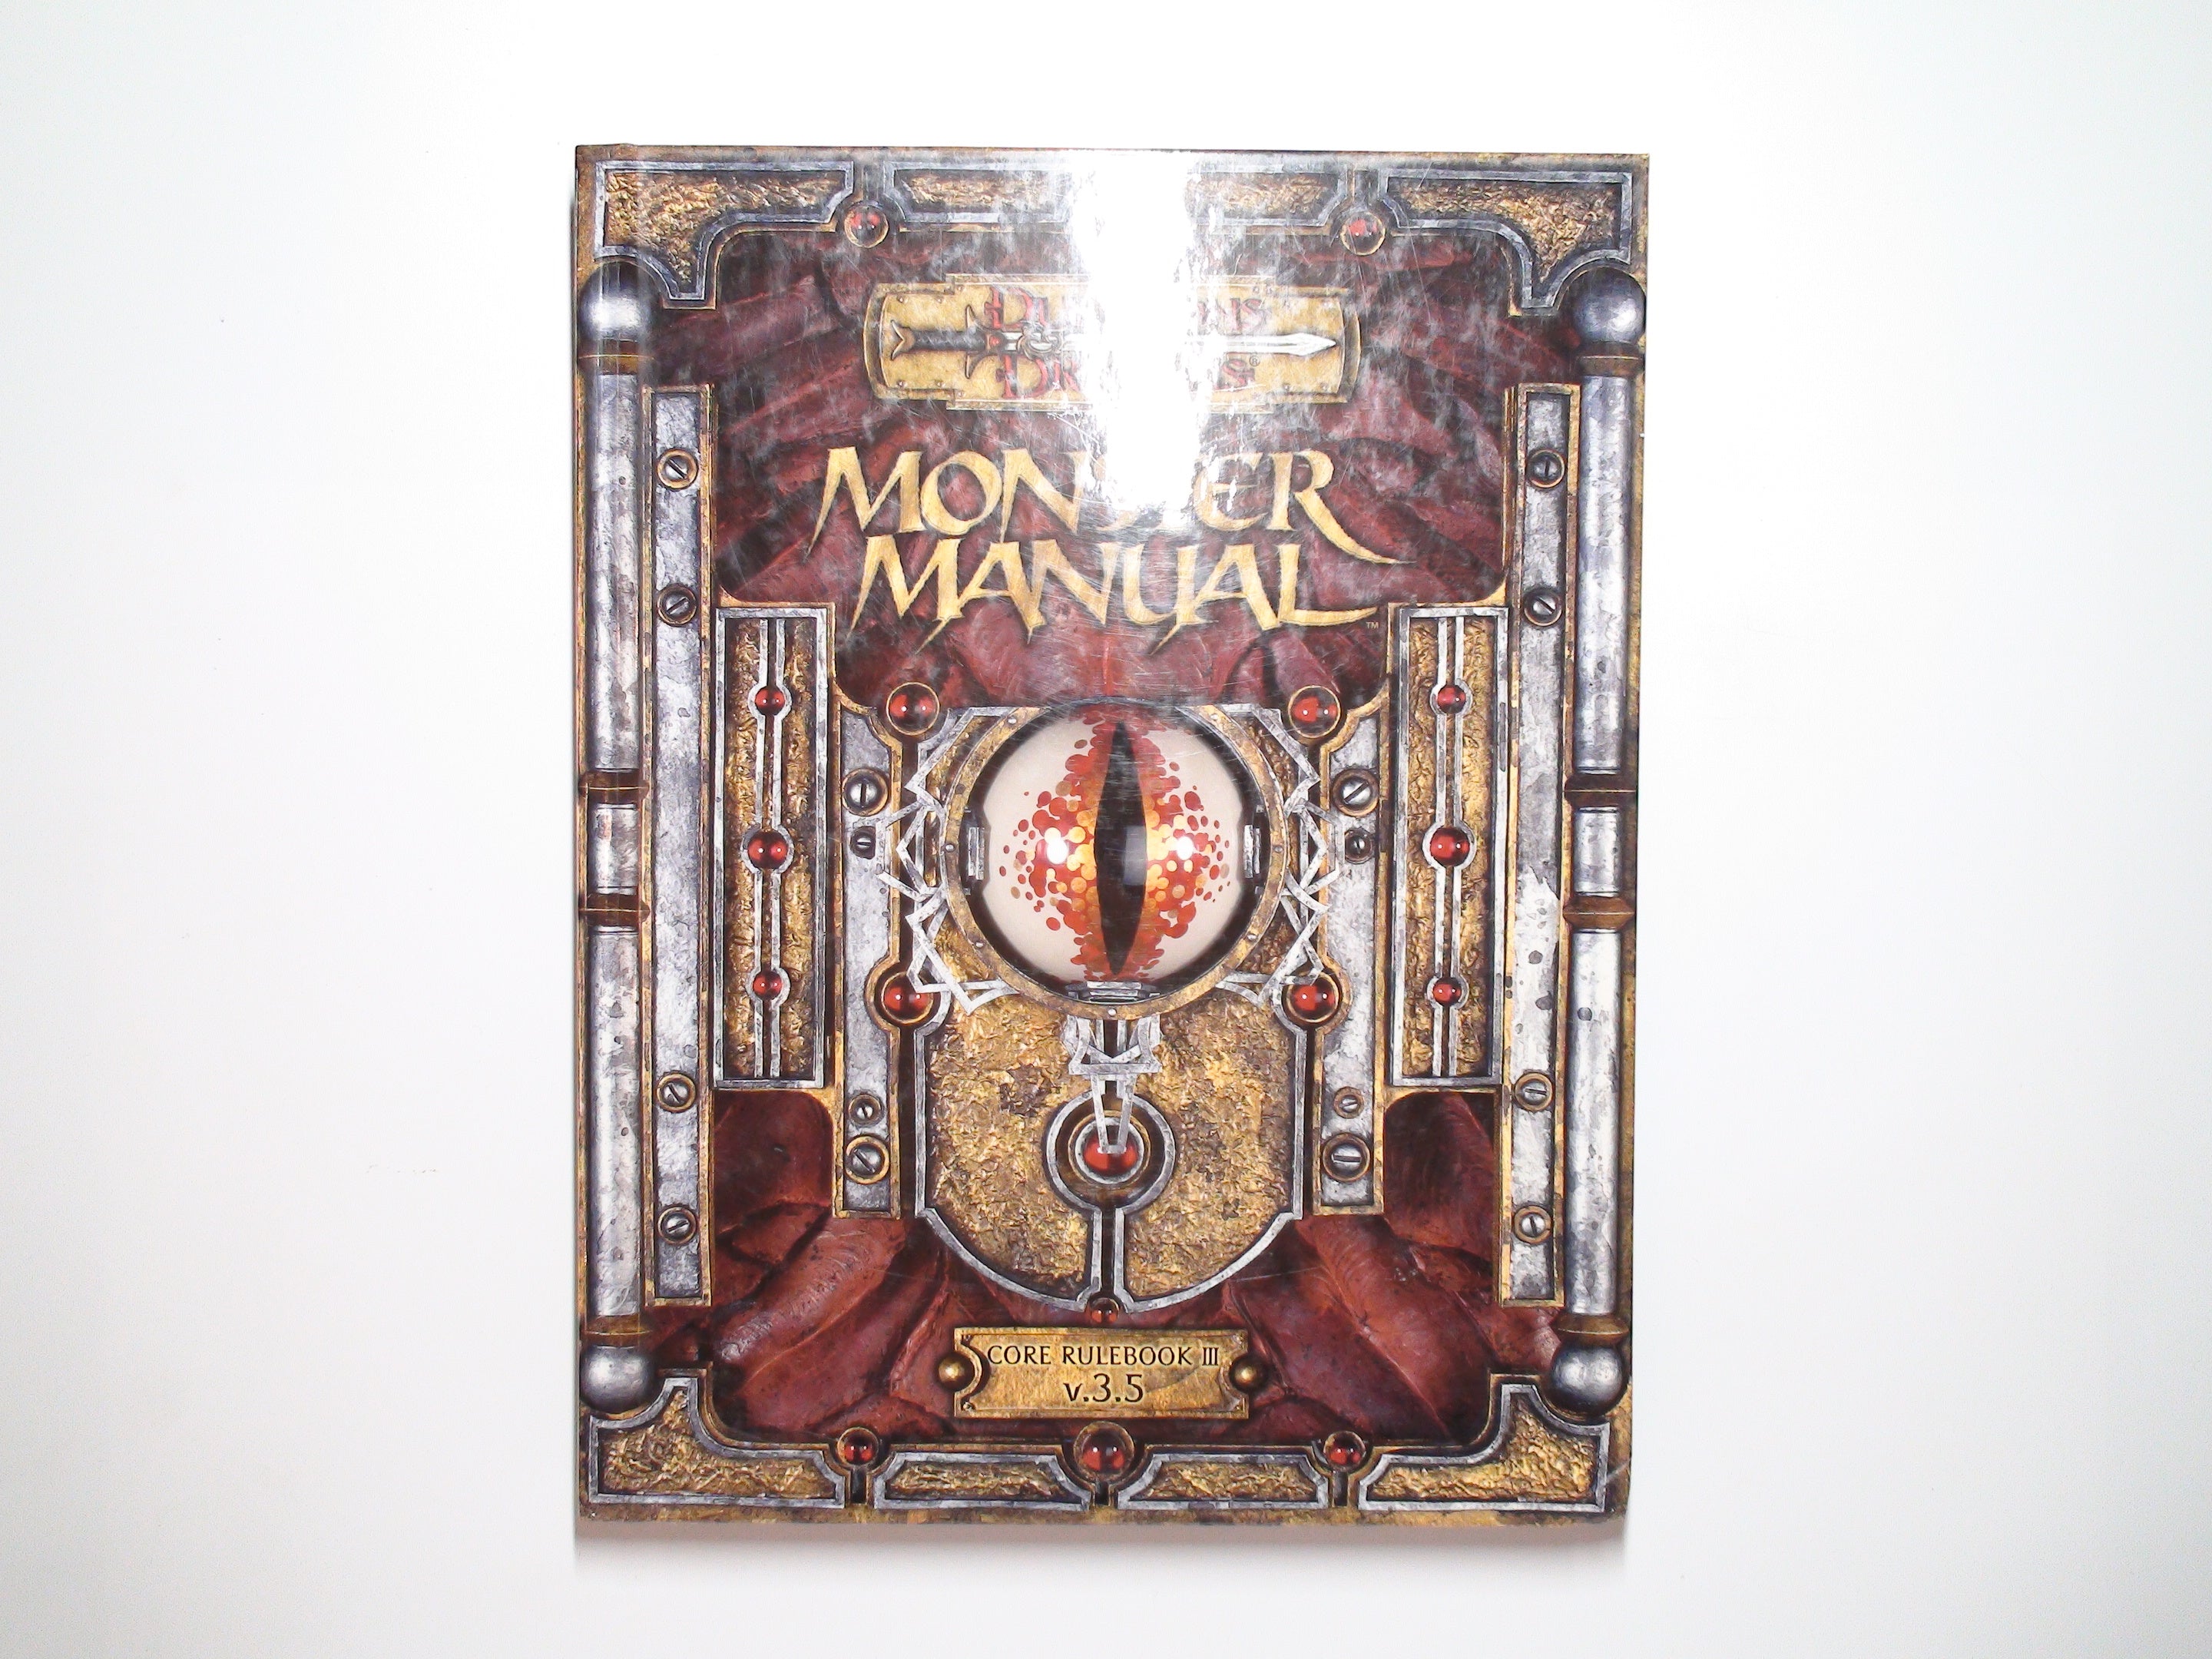 Monster Manual, Core Rulebook III, D&D 3.5, 1st Ed, 1st Printing, 2003